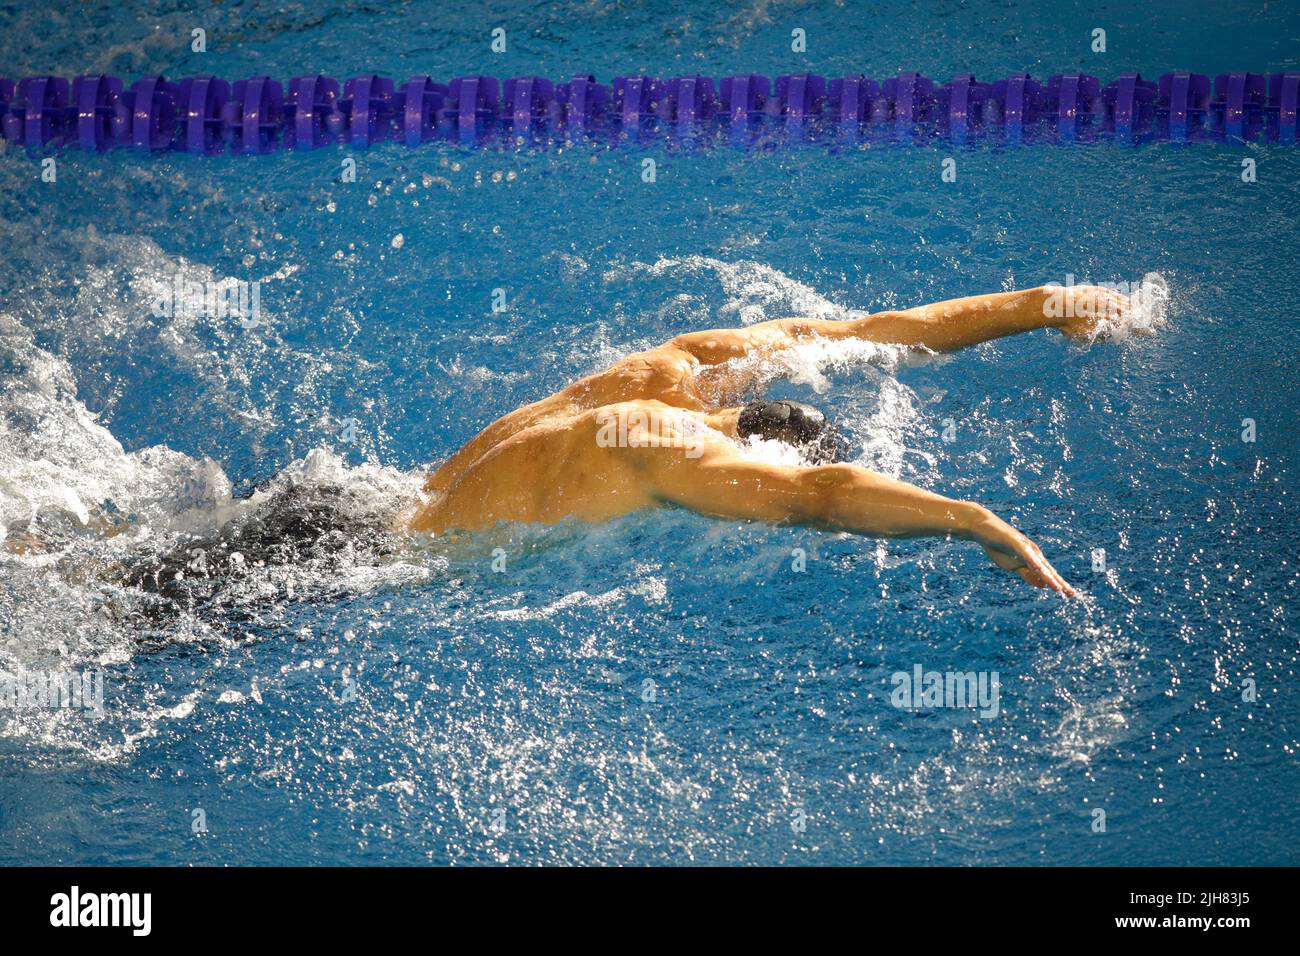 Details with a professional male athlete swimming in an olympic swimming pool butterfly style. Stock Photo